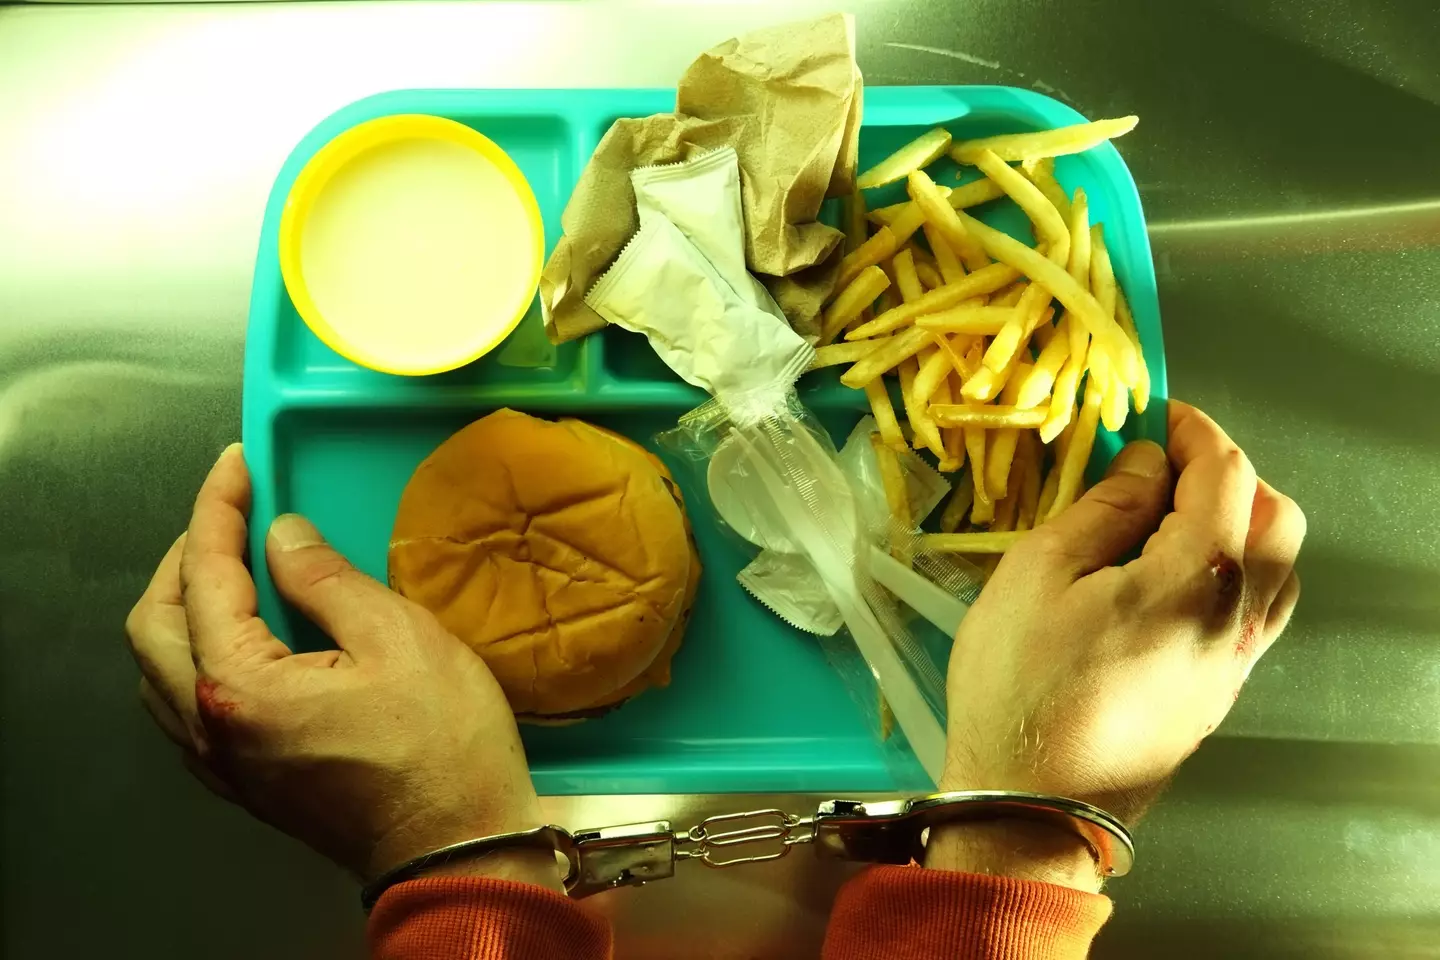 Death row inmates receive the same food as everyone else for their last meal.